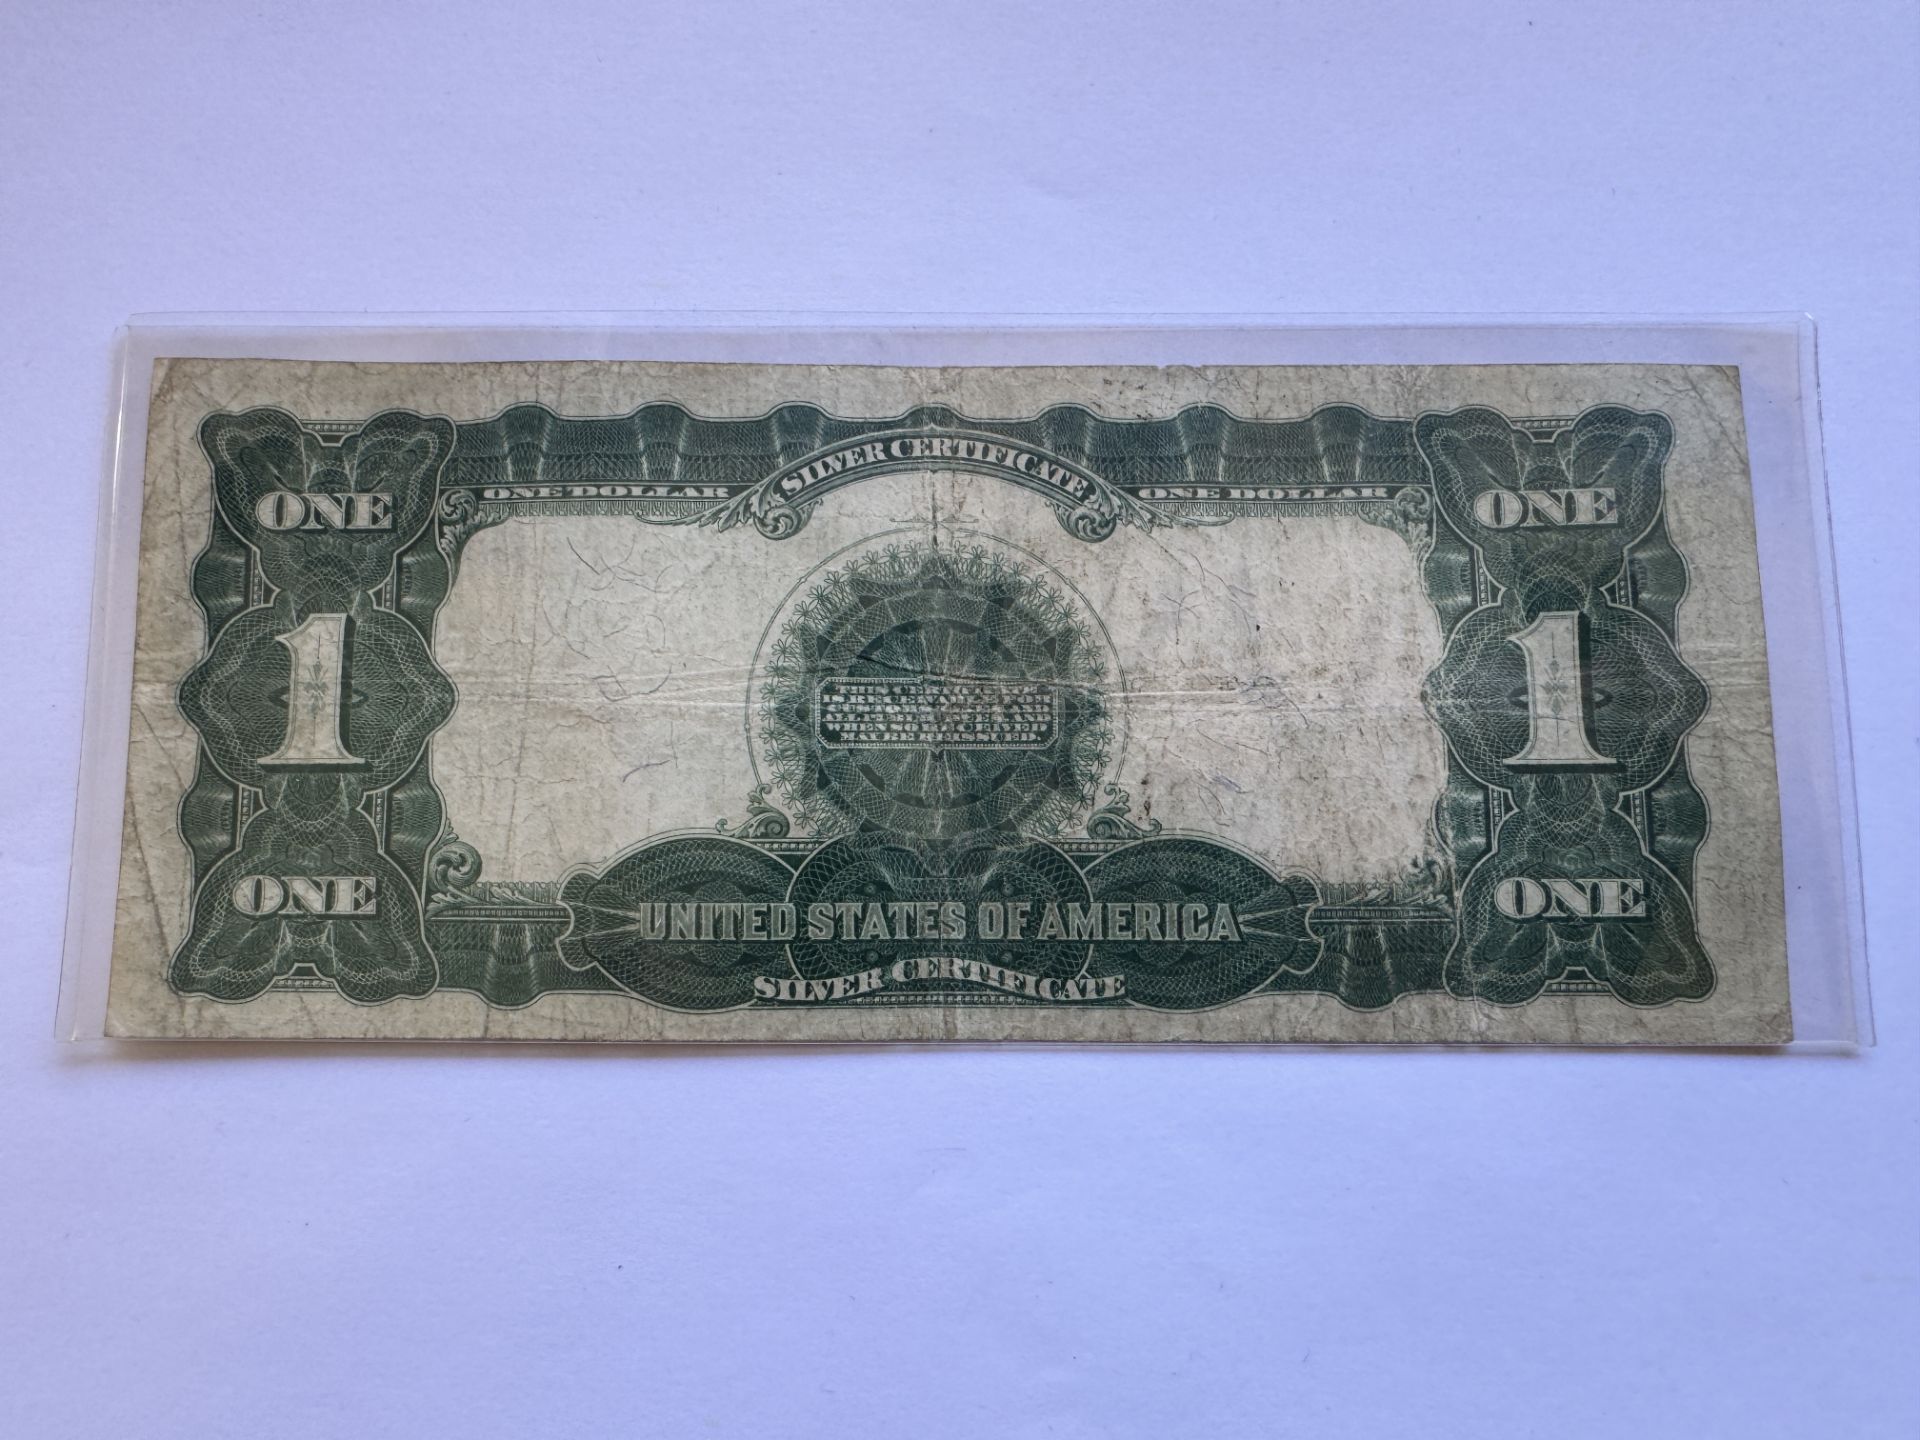 1899 $1 BLACK EAGLE ONE DOLLAR NOTE - LARGE SILVER CERTIFICATE - Image 2 of 2